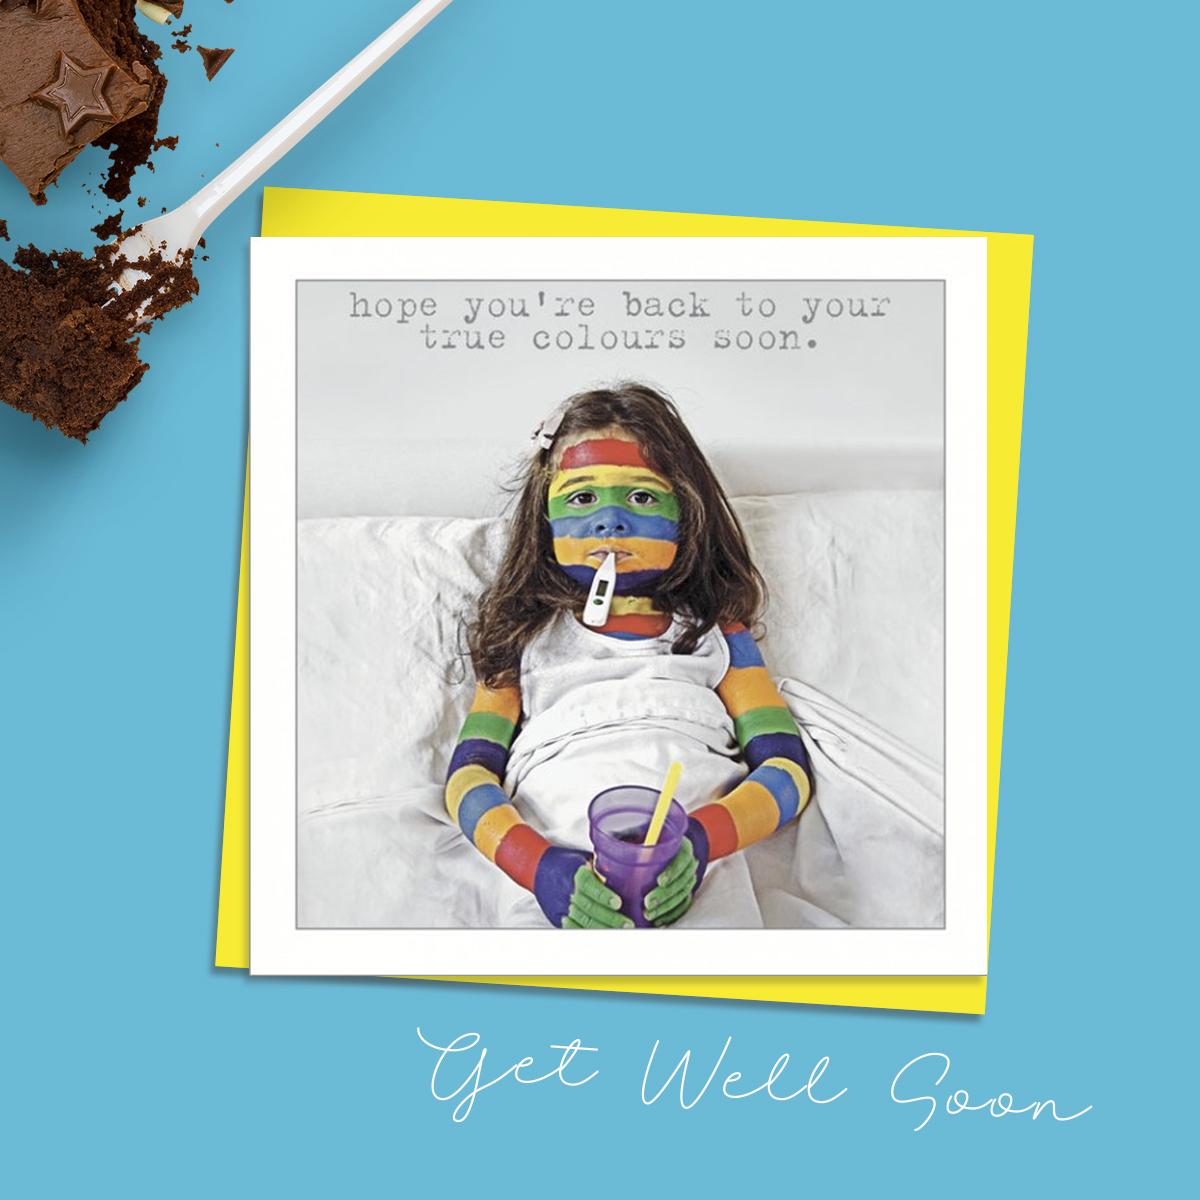 Get Well Card With A Touch Of Humour Showing A Girl In Bed With A Thermometer In Her Mouth. Her Face And Arms Are Coloured In Rainbow Stripes. Caption: Hope You're Back To Your True Colours Soon. Message Inside: Get well Soon. Complete With Neon Yellow Envelope